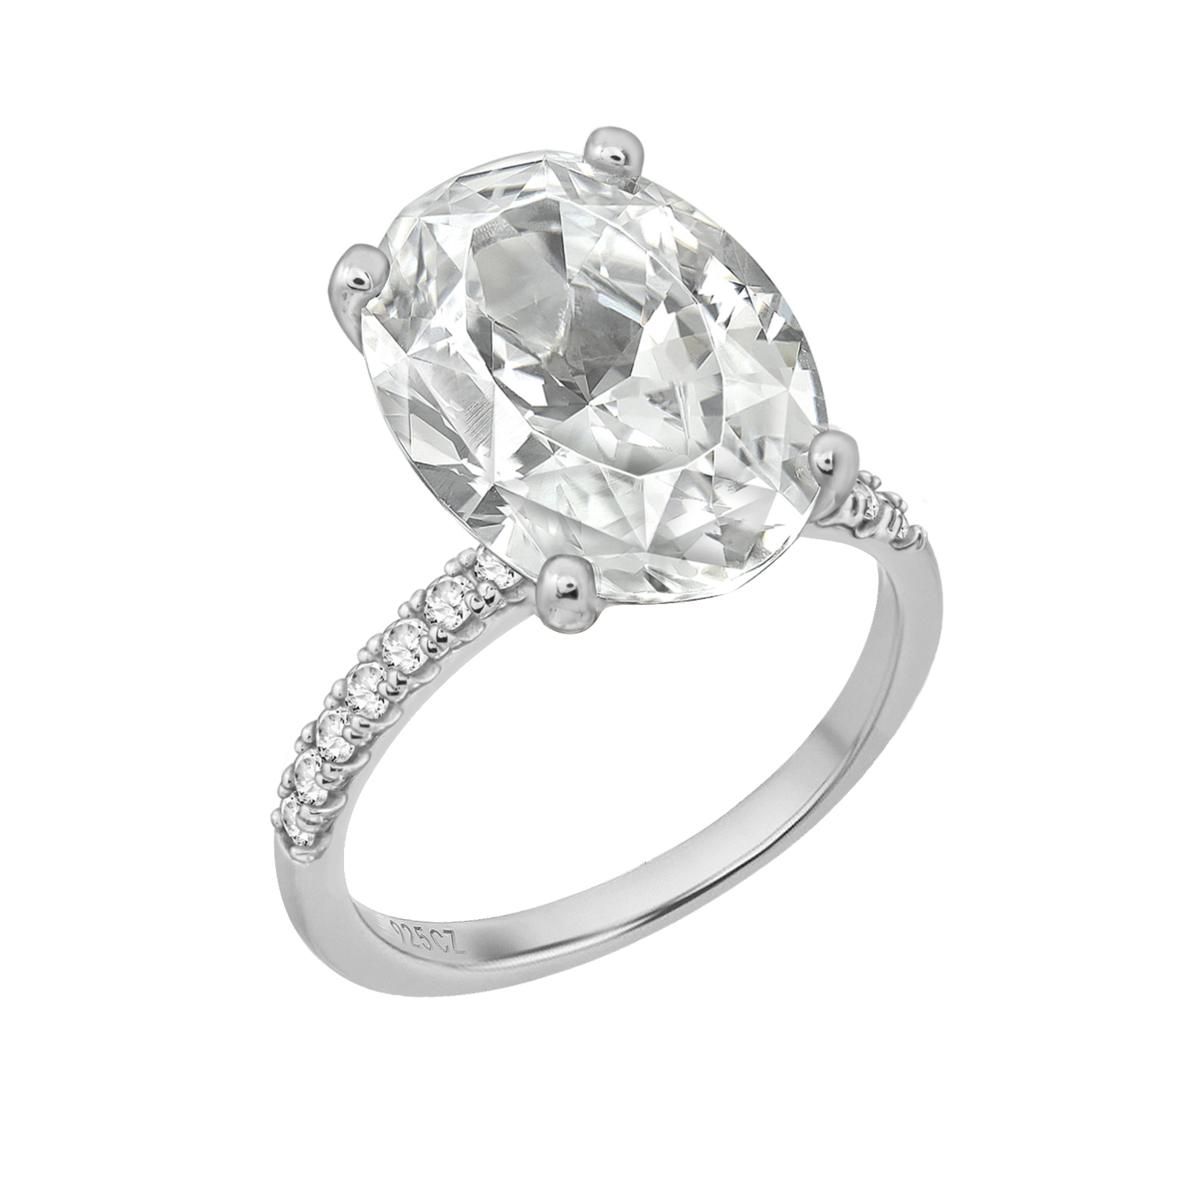 Radiance by Absolute™ 19.29ctw Oval Solitaire Engagement Ring - 23032168 | HSN | HSN